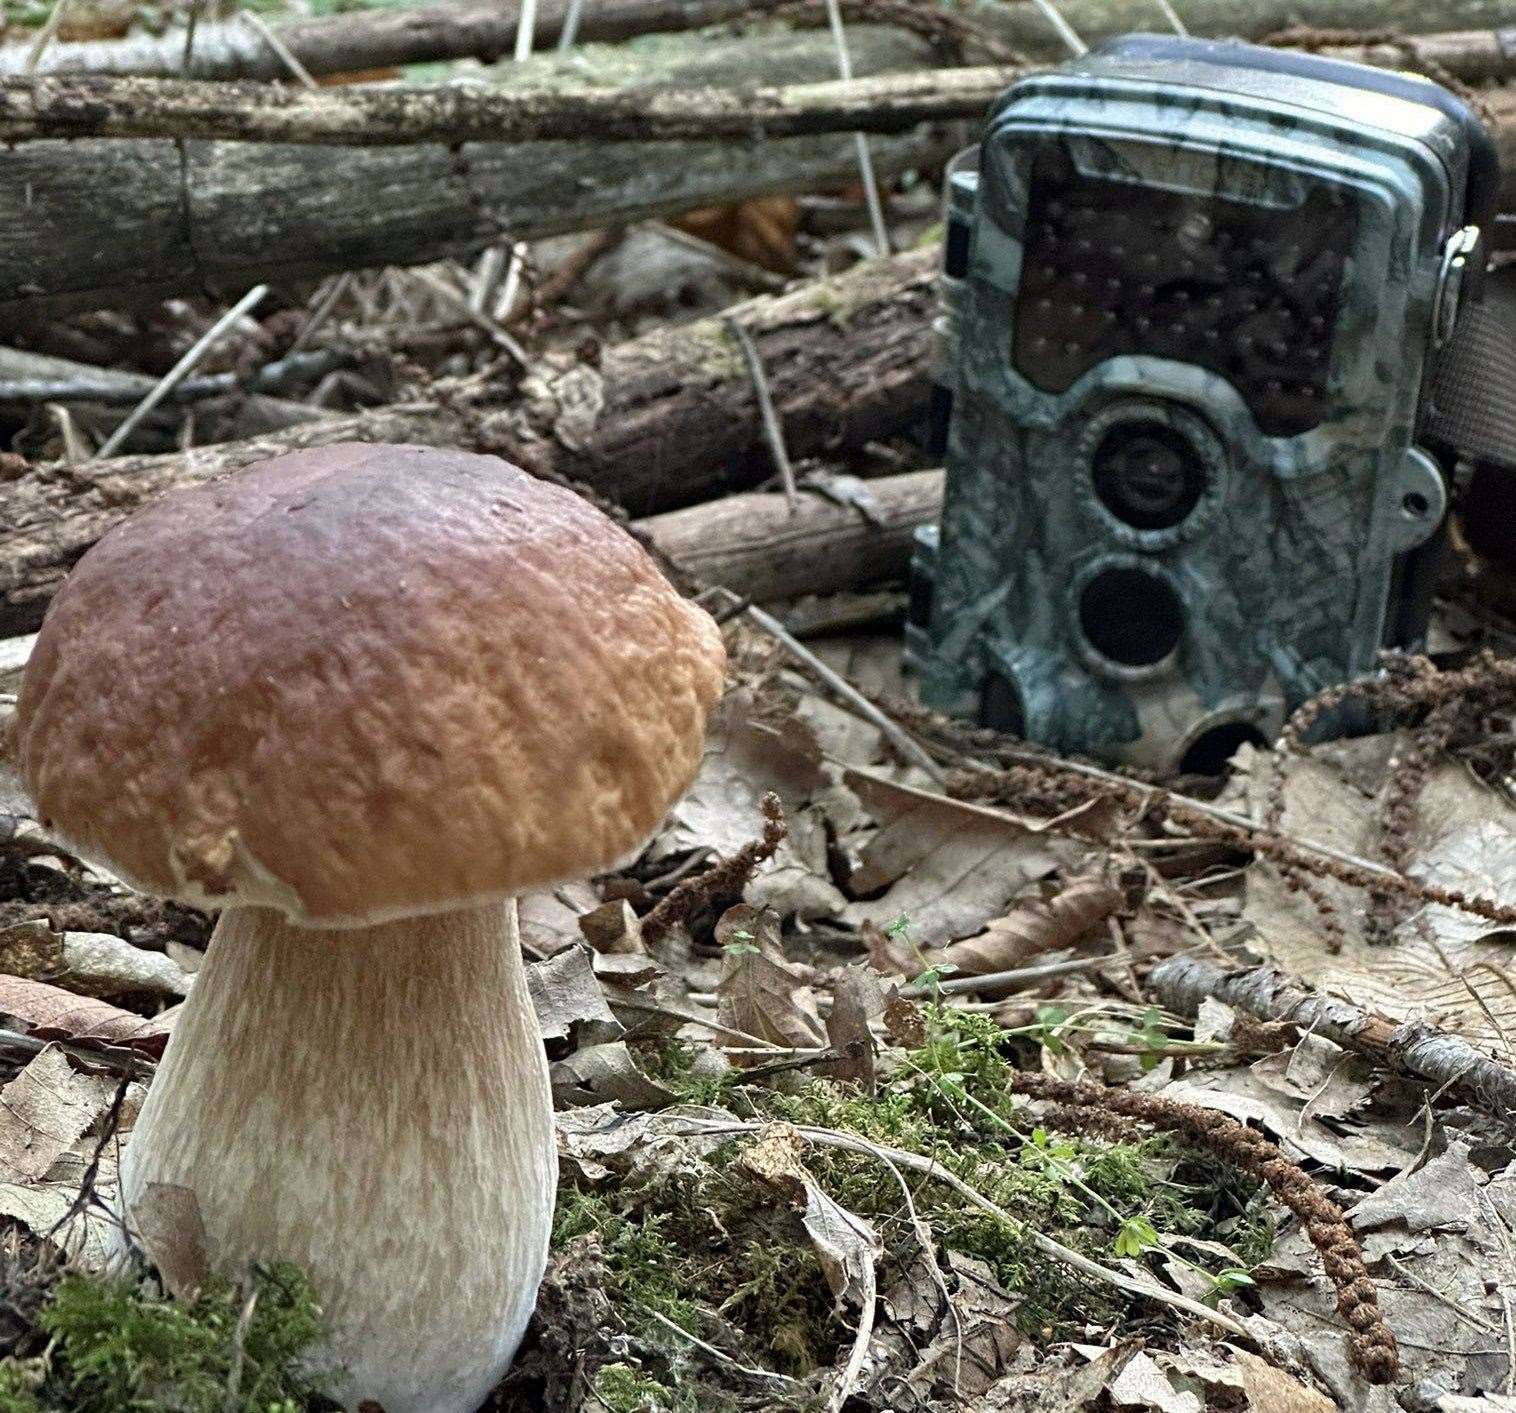 The wildlife camera setup before the mushroom was devoured. Picture: Stephen Sangster